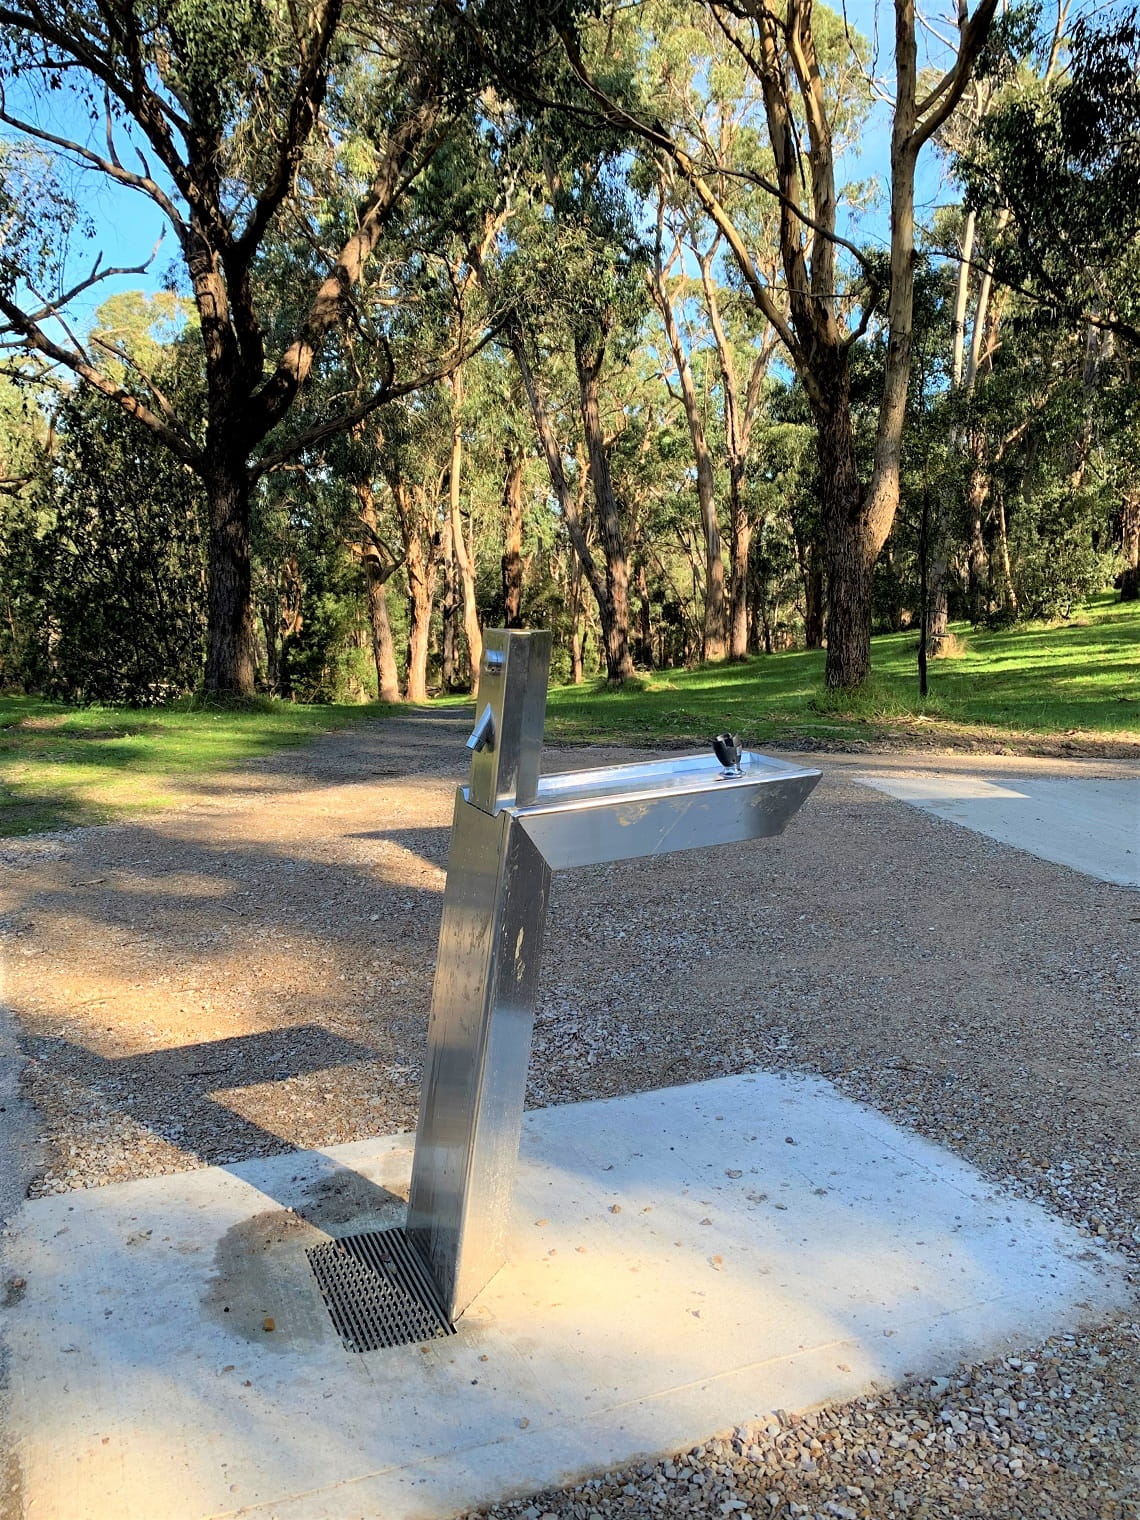 A stainless steel drinking fountain sits on top of a newly poured concrete slab. It is surrounded by gravel, and in the background are tall gum trees and grass.